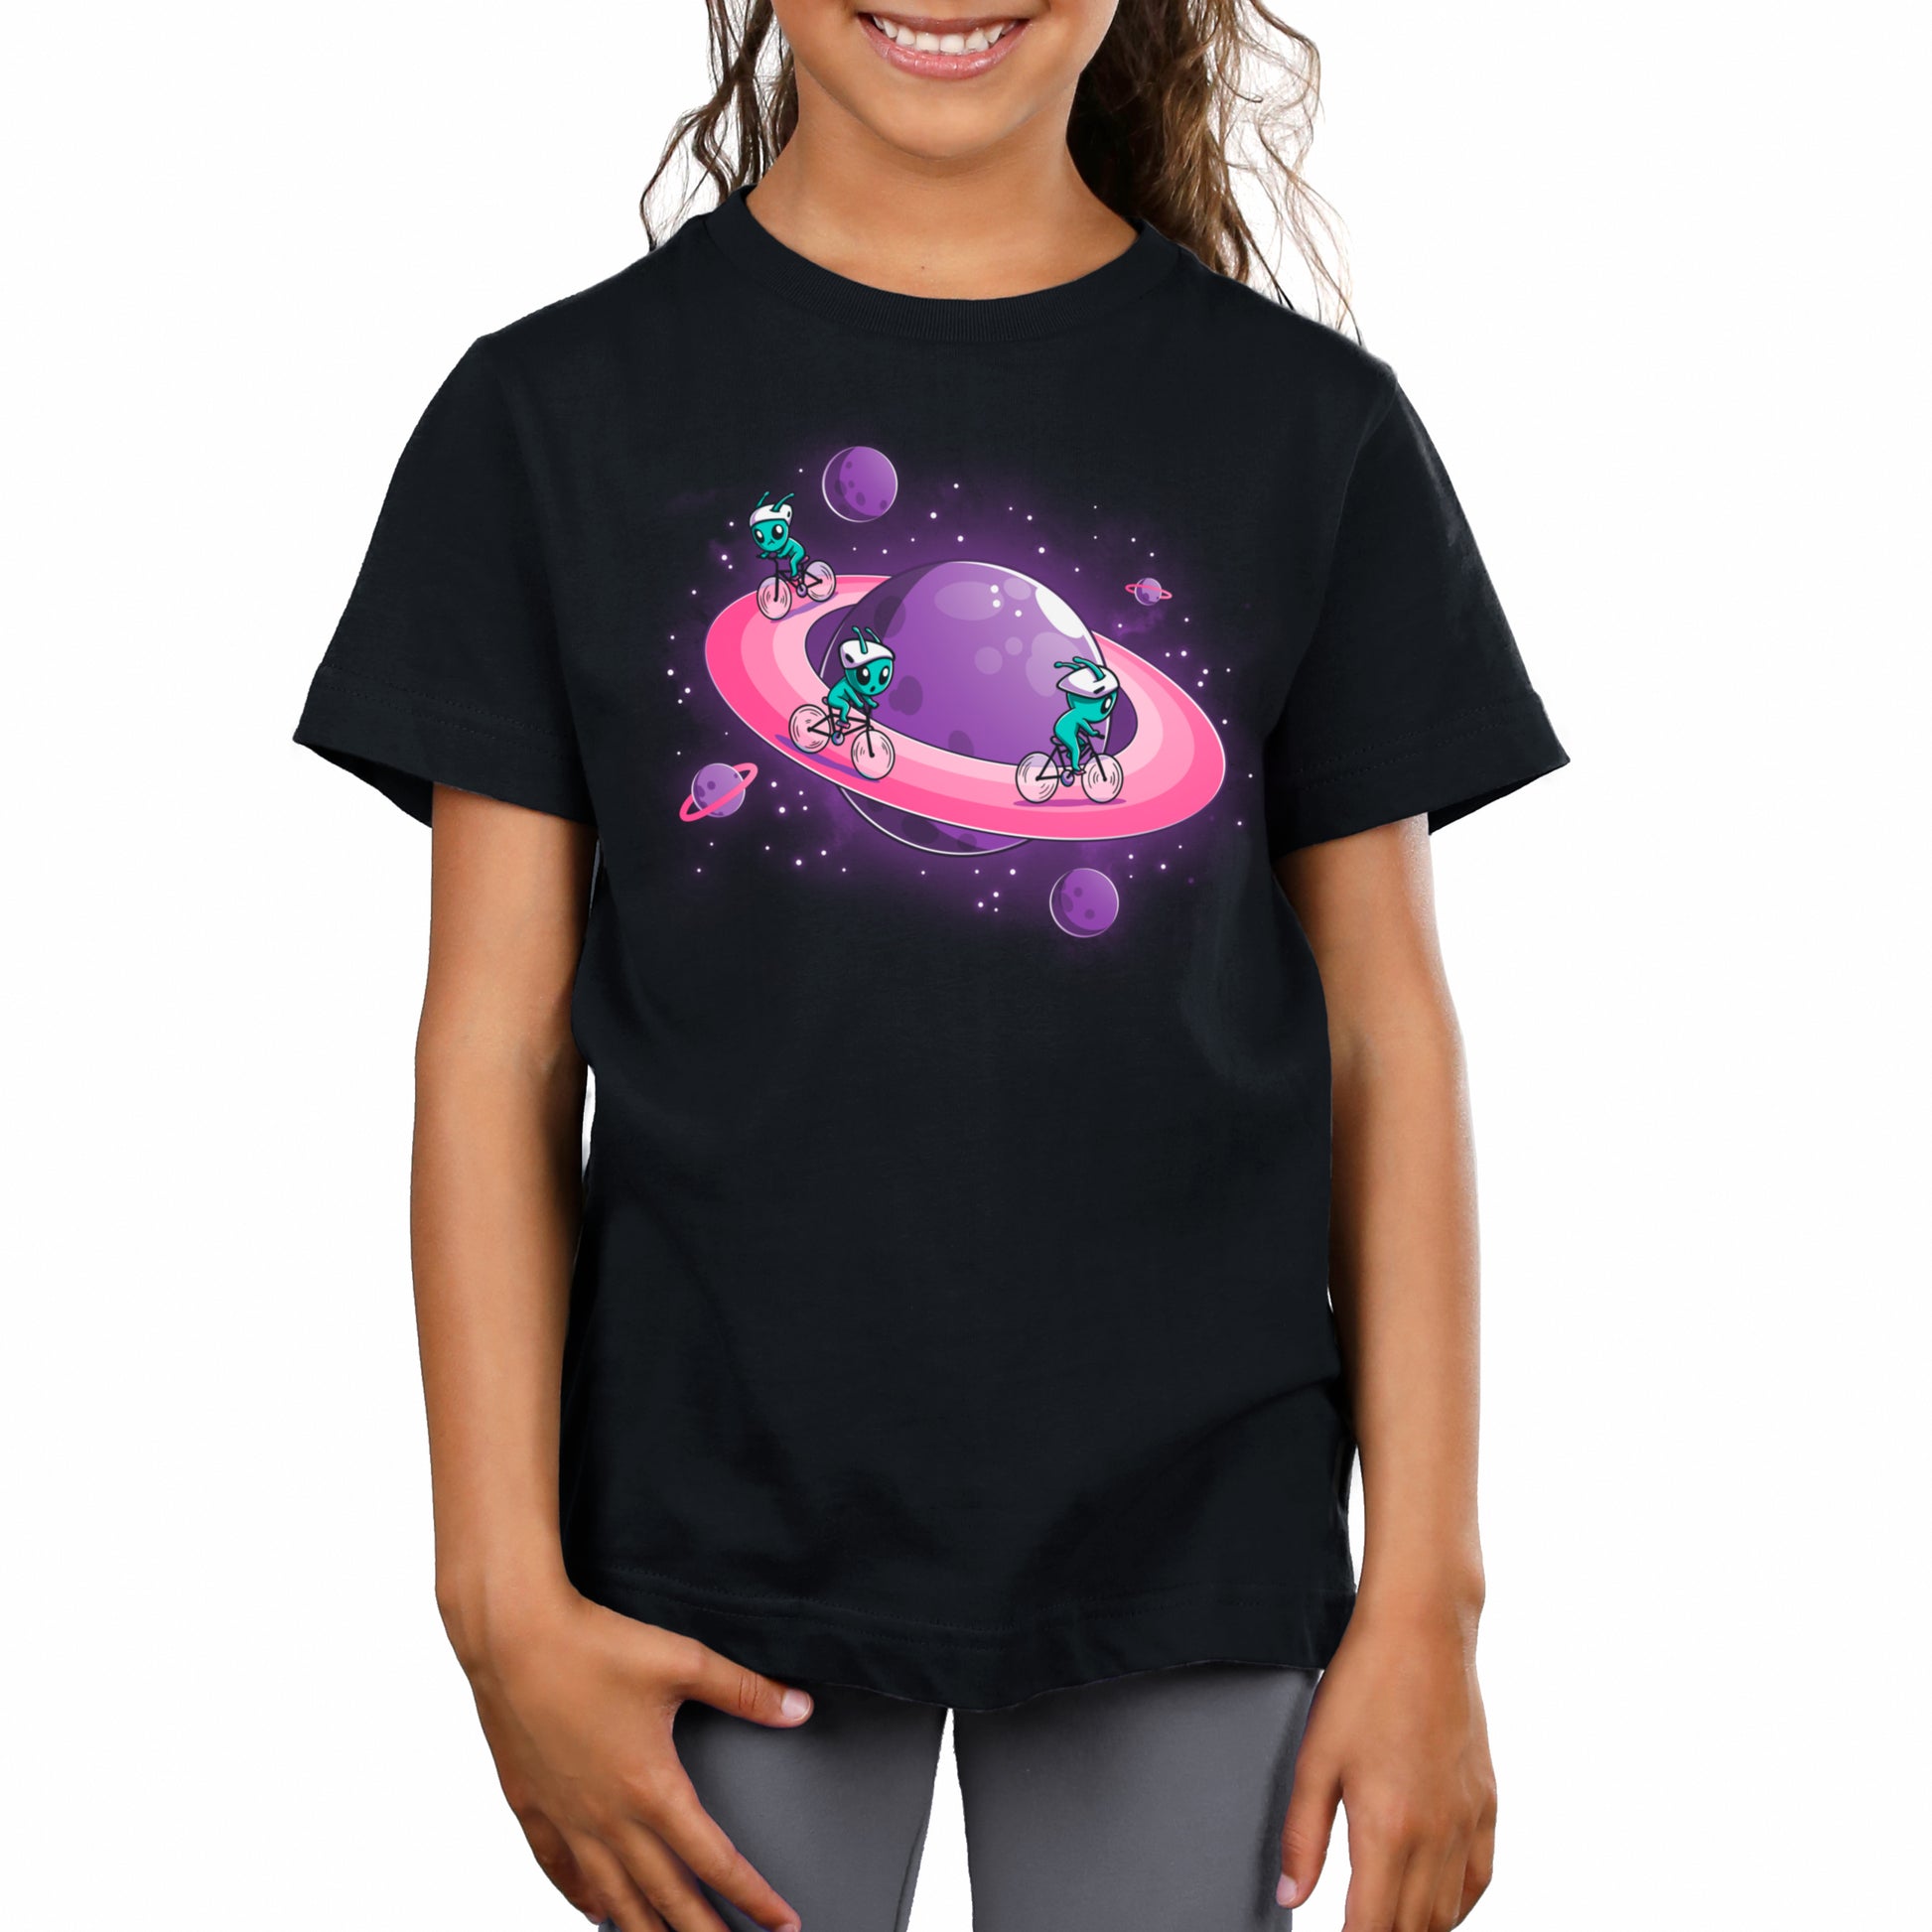 Child wearing a black unisex Space Race tee from TeeTurtle with a colorful graphic of cartoon characters in space.